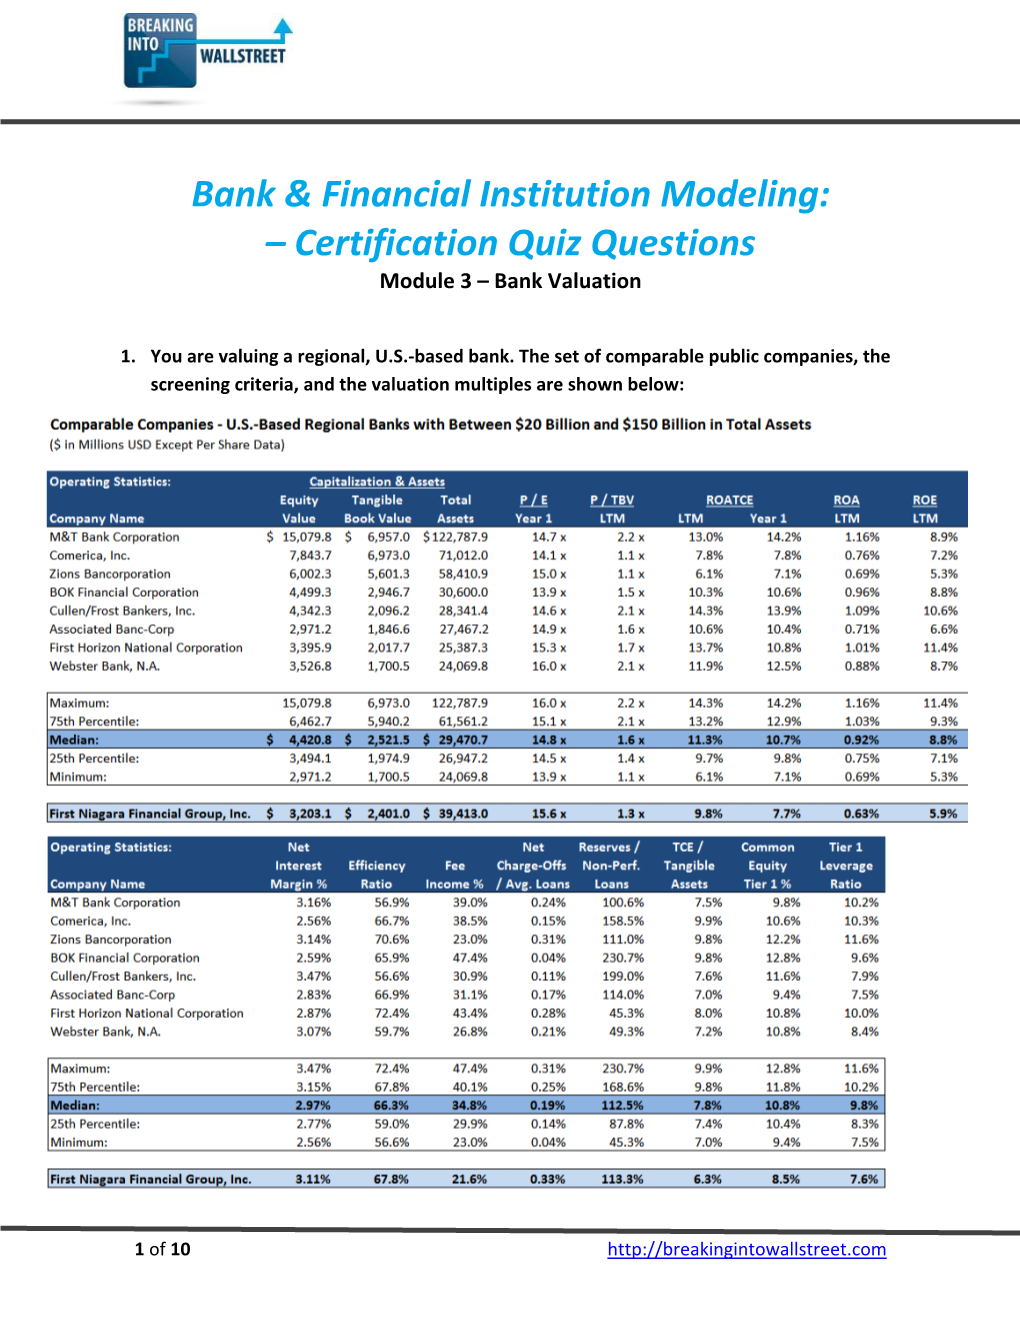 Bank & Financial Institution Modeling: – Certification Quiz Questions